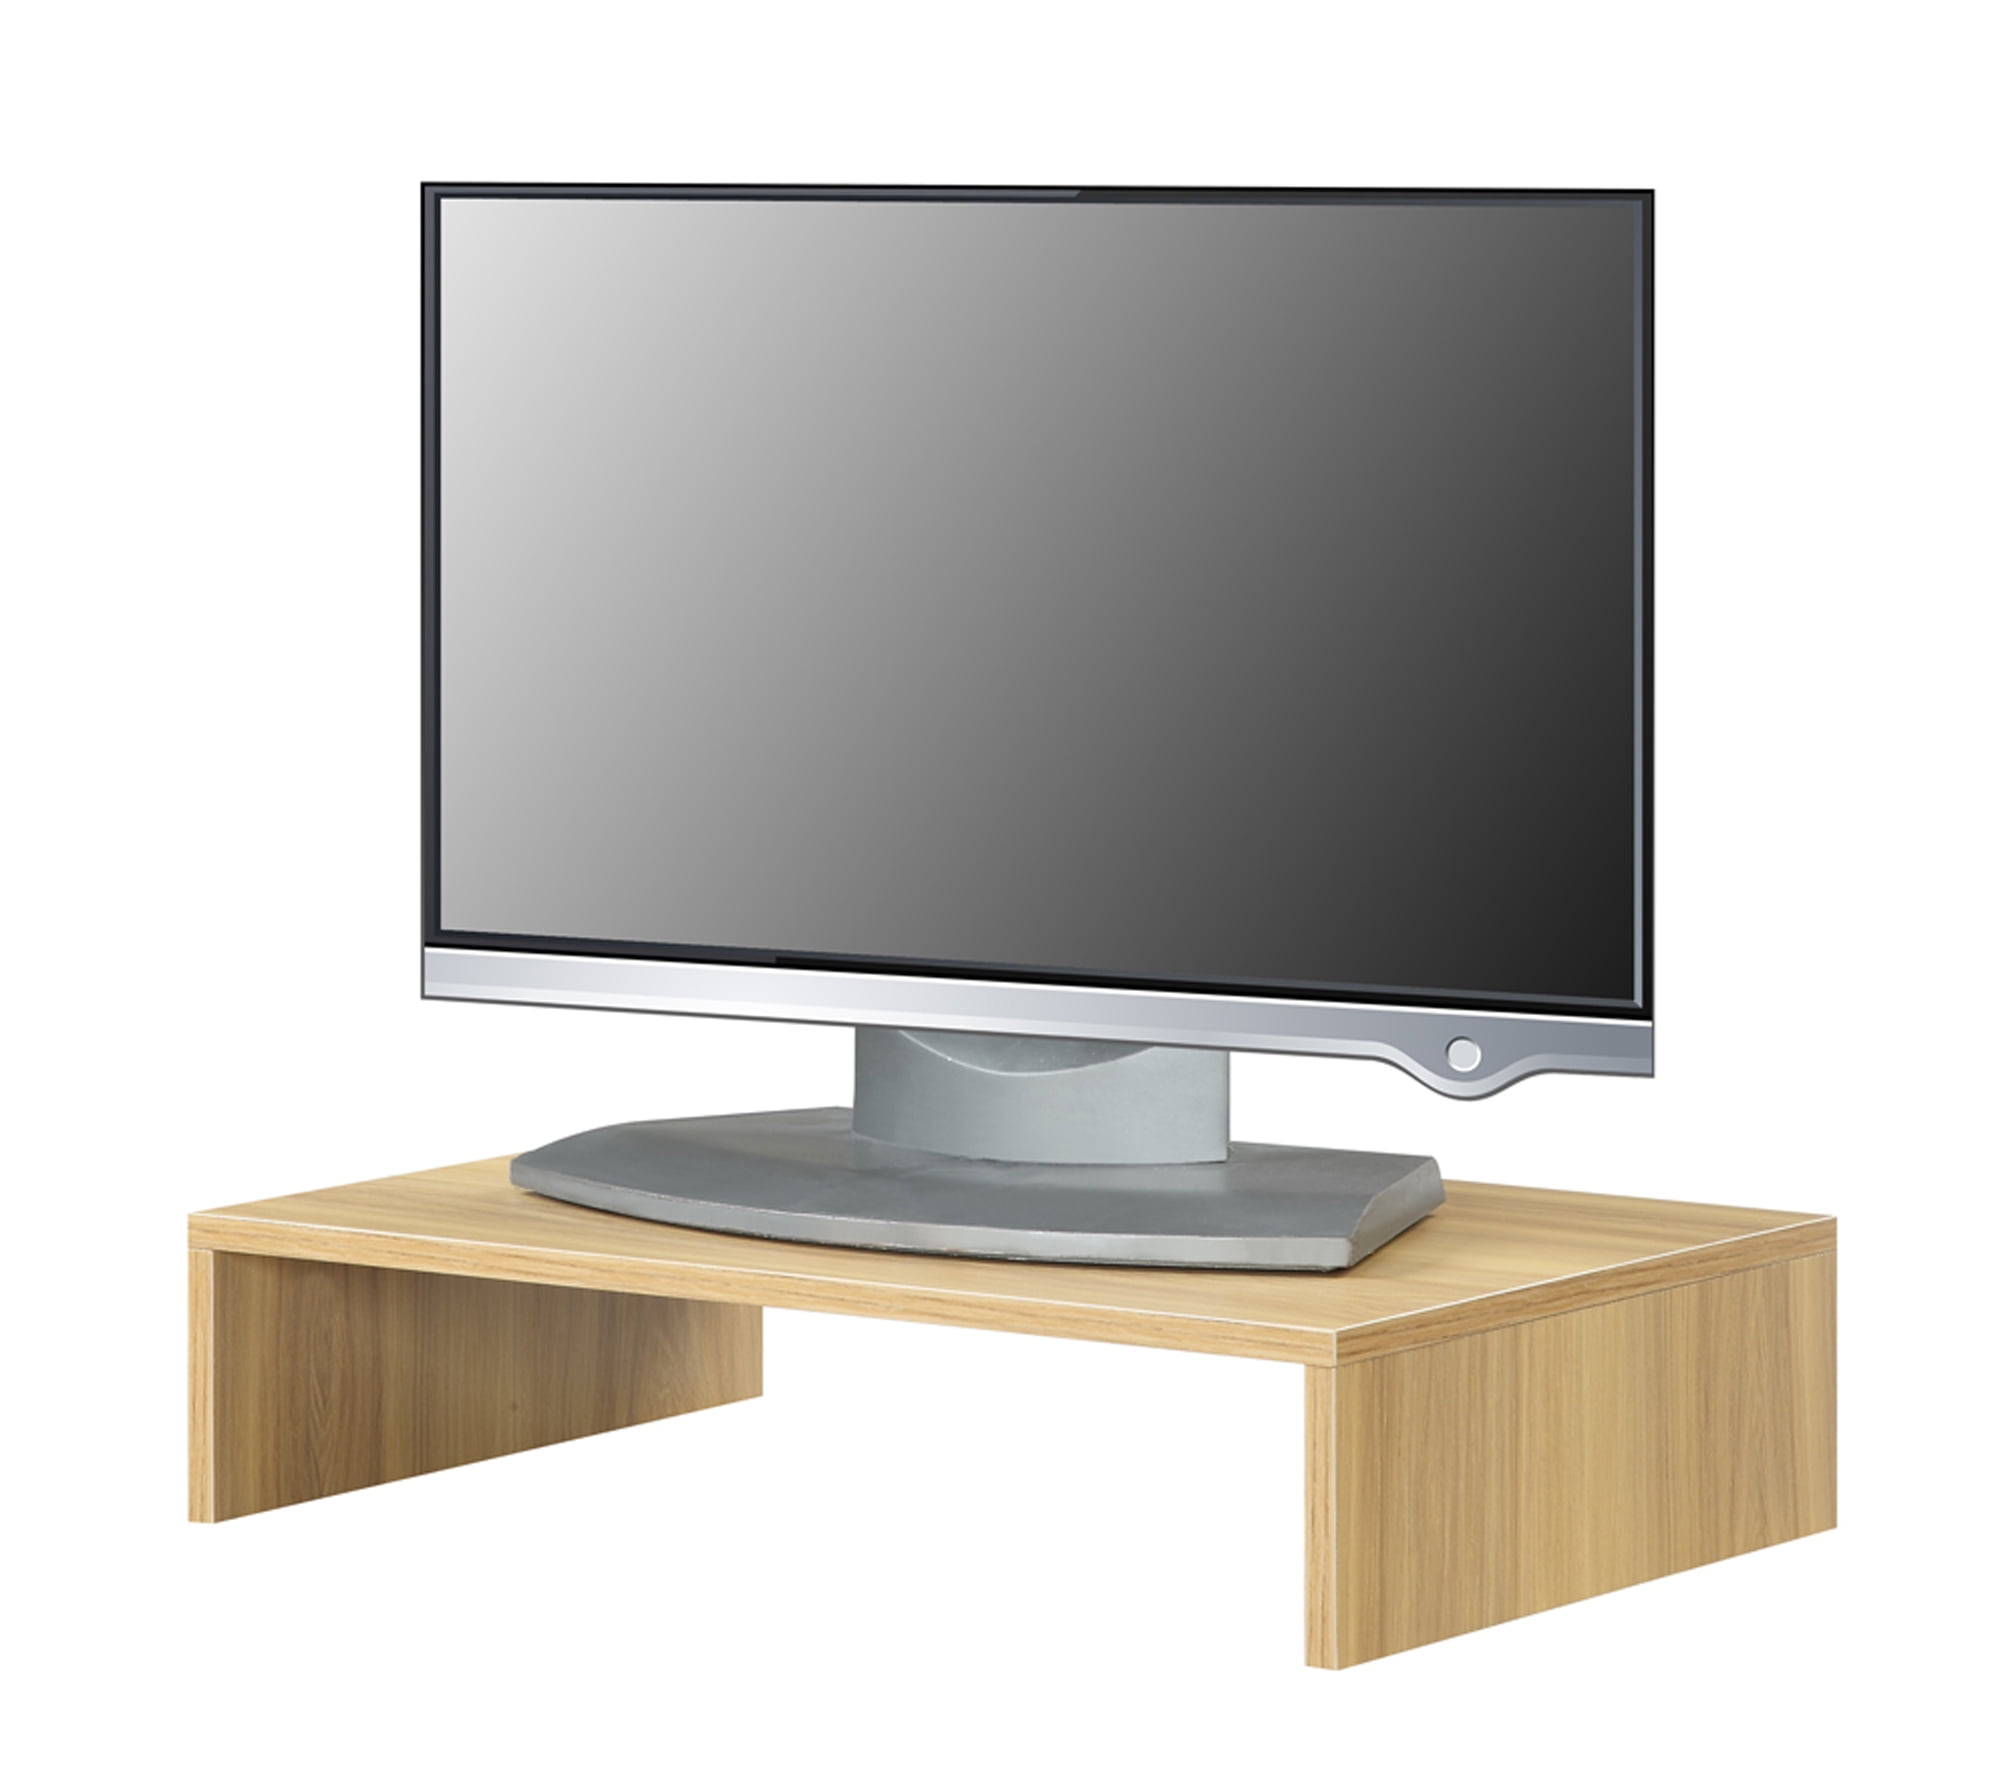 Designs2Go Small TV/Monitor Riser for TVs up to 26 Inches, Light